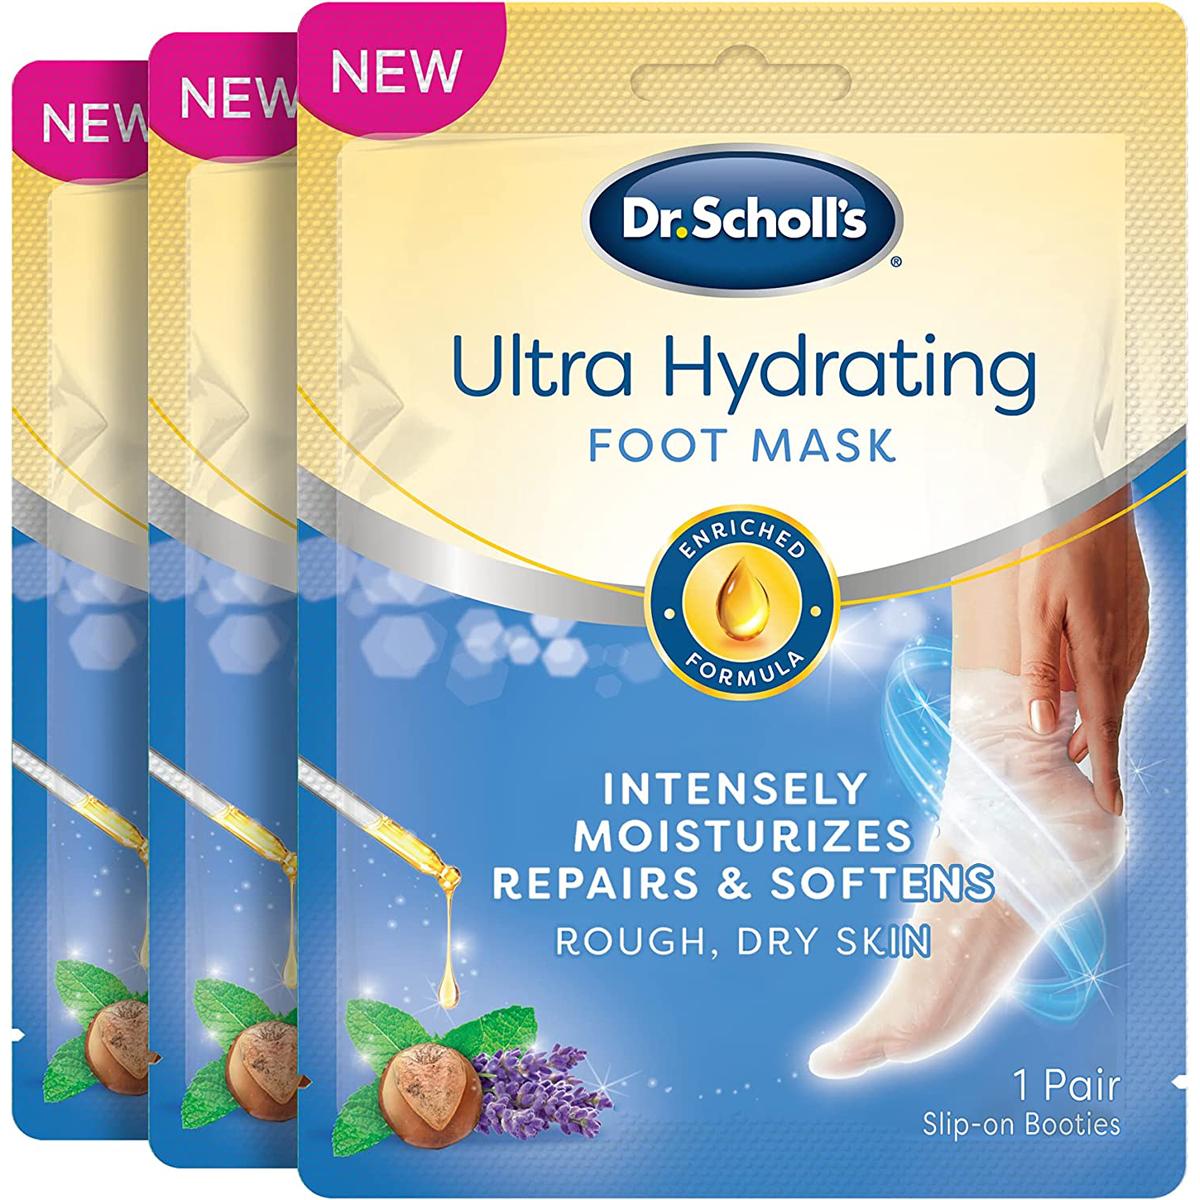 Dr Scholls Ultra Hydrating Foot Mask for Rough Dry Skin 3 Pack for $5.33 Shipped